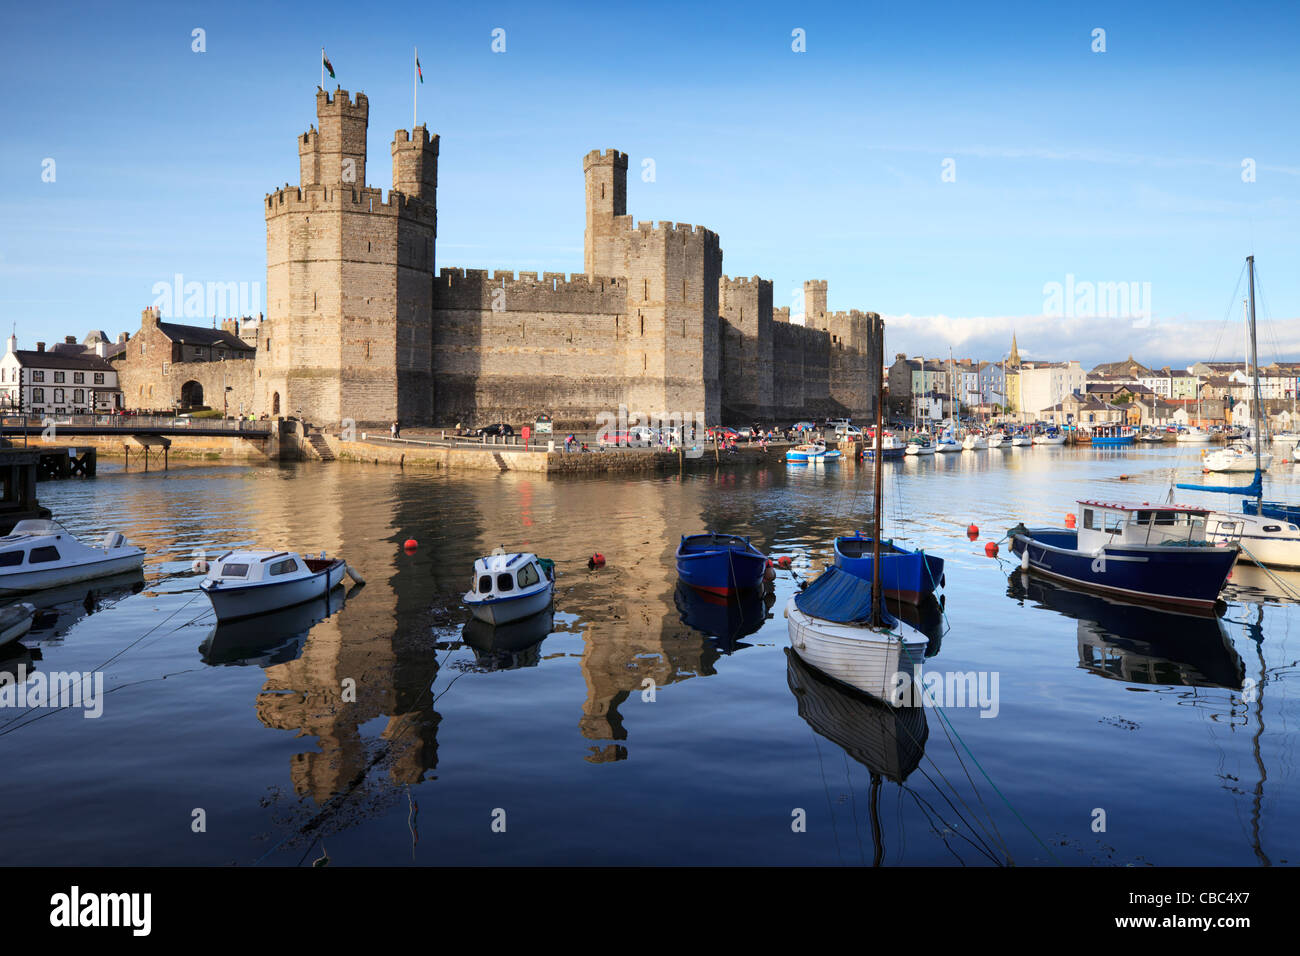 A bright summer evening at Caernarfon Castle, Gwynedd, North Wales. The castle is reflected in the River Seiont. Stock Photo